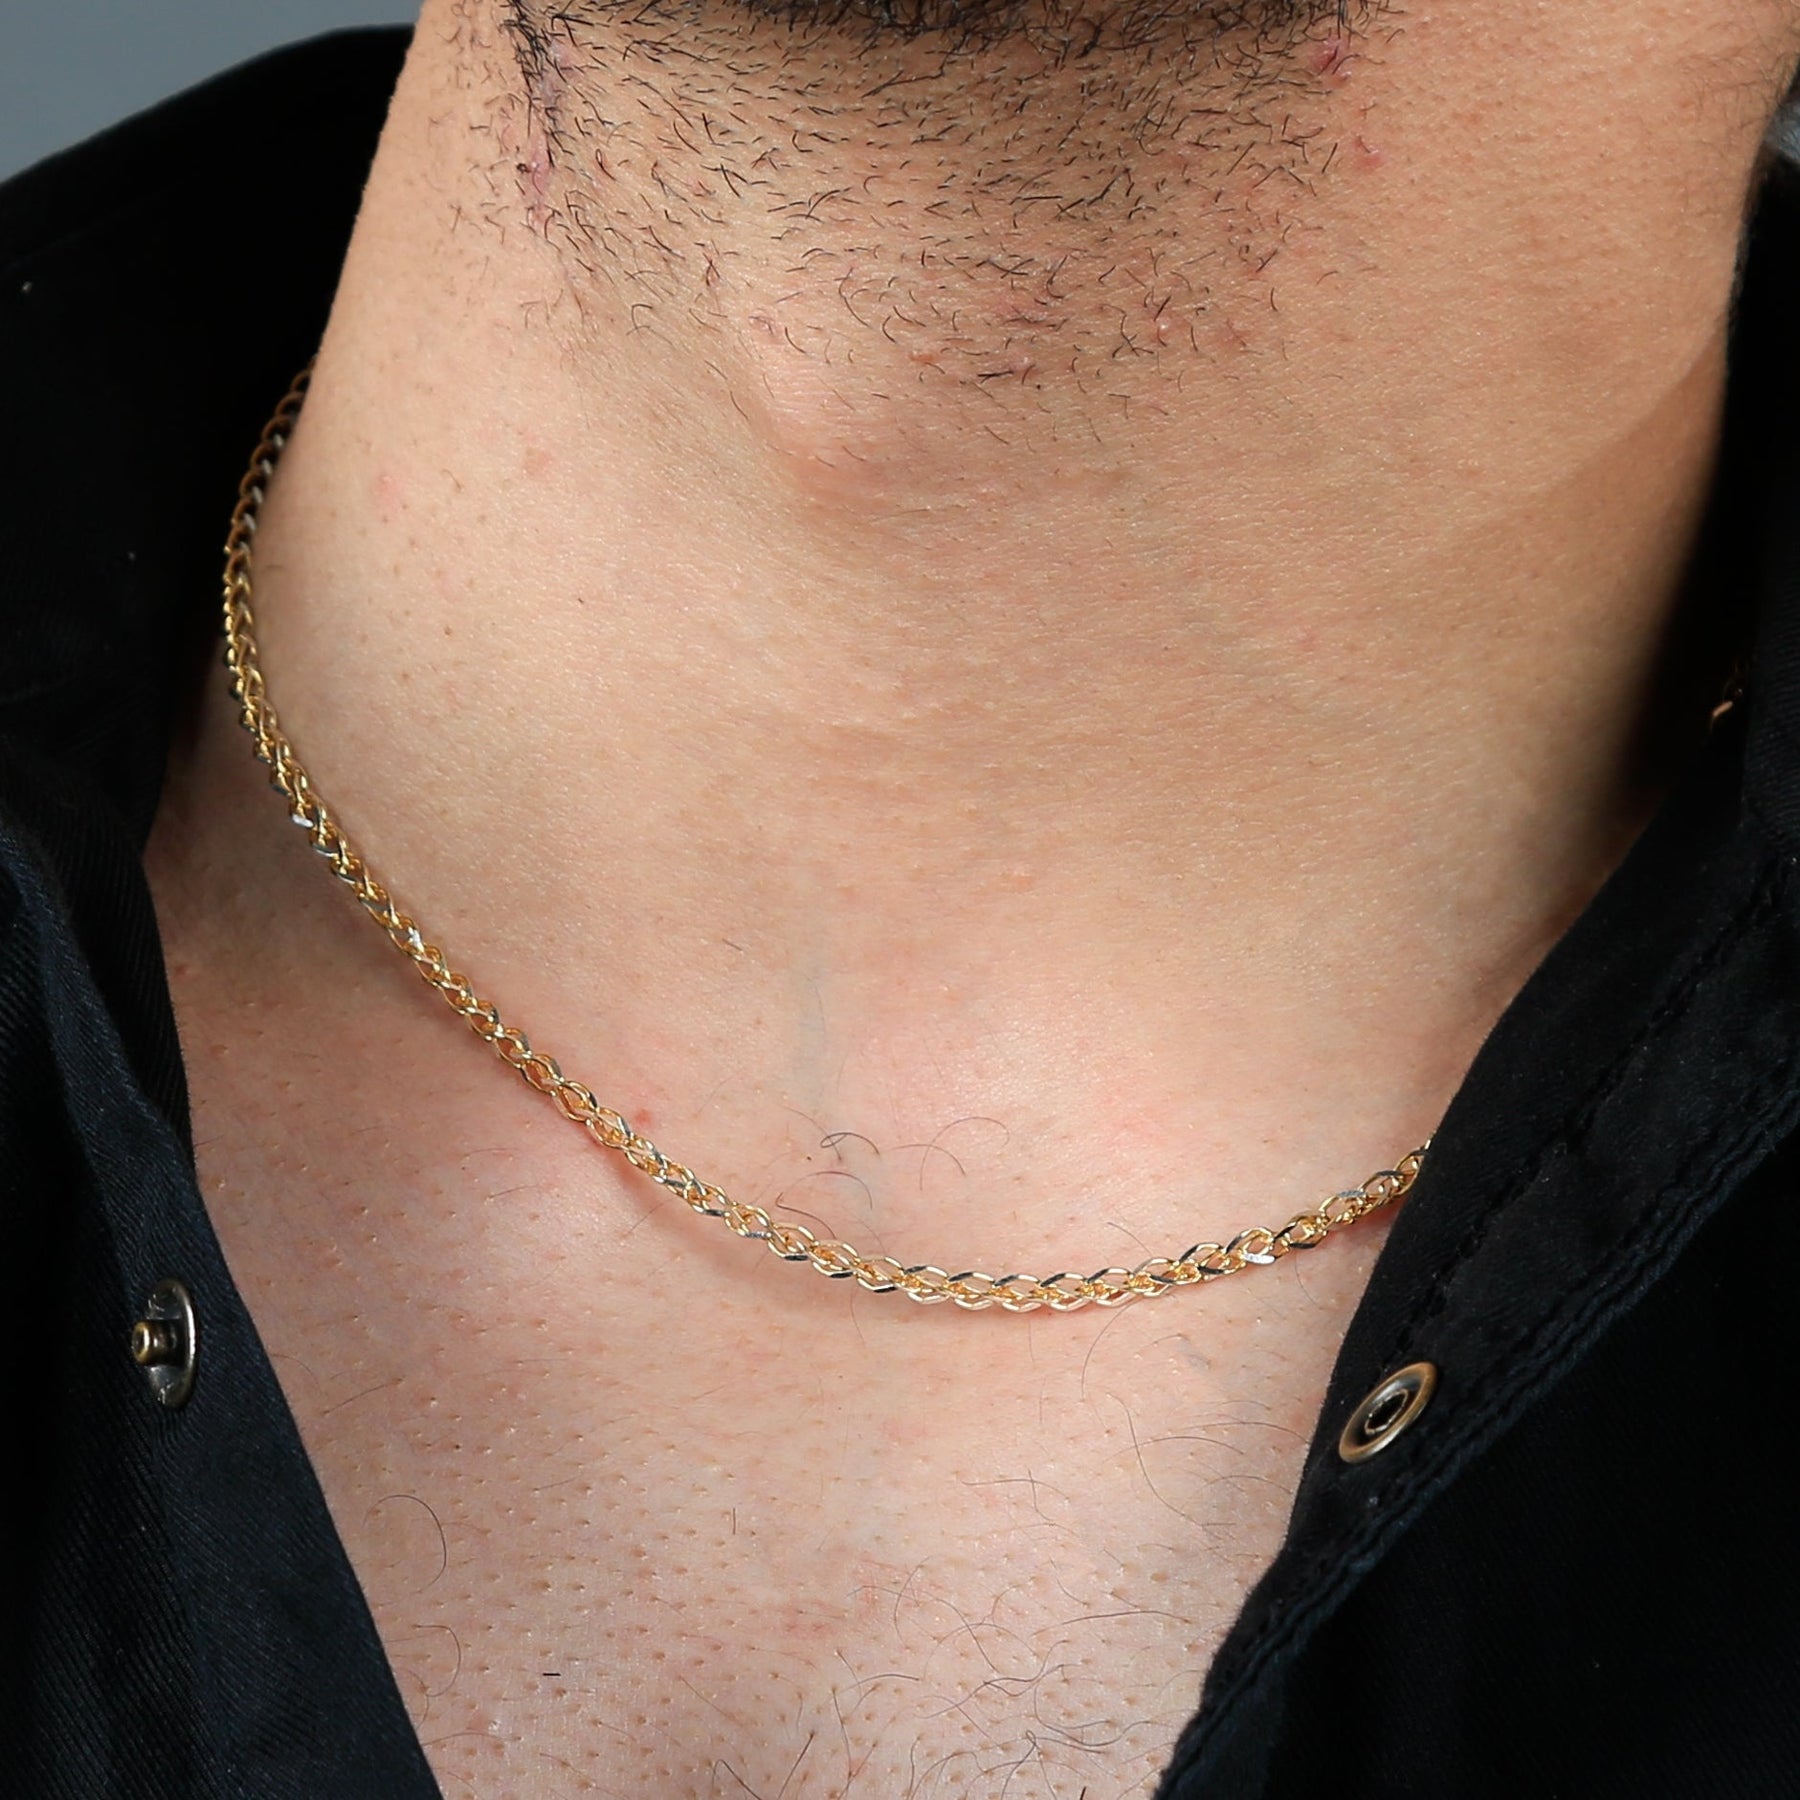 Stainless Steel Chain Necklace Size 3.5mm 5mm 7mm Stainless Steel Cuban  Curb Chain Necklace Mens Thick Heavy Duty From Johnsalmons, $10.83 |  DHgate.Com